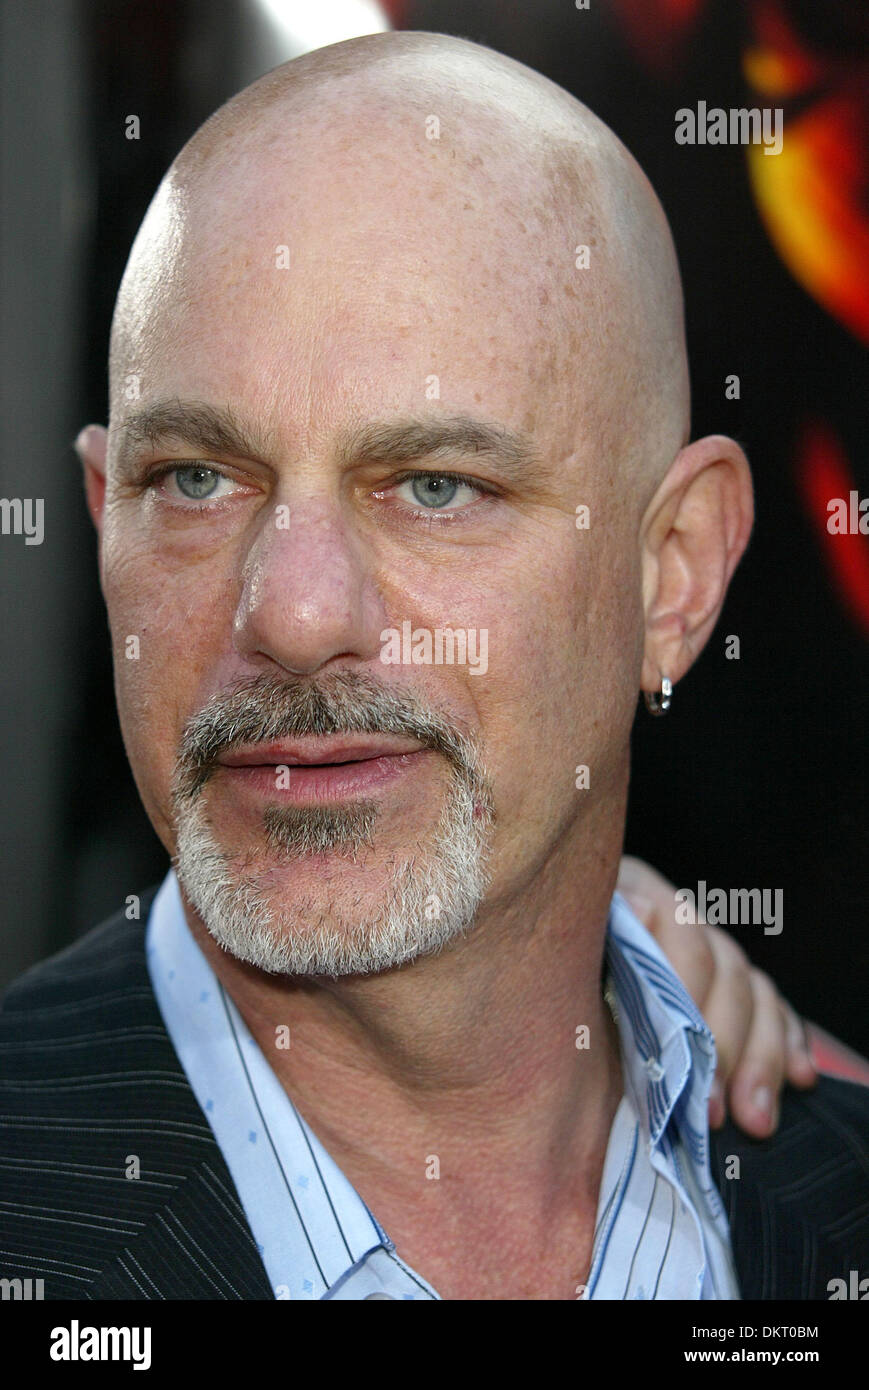 ROB COHEN.FILM DIRECTOR.WESTWOOD, LOS ANGELES, USA.05/08/2002.LAB7061. Stock Photo